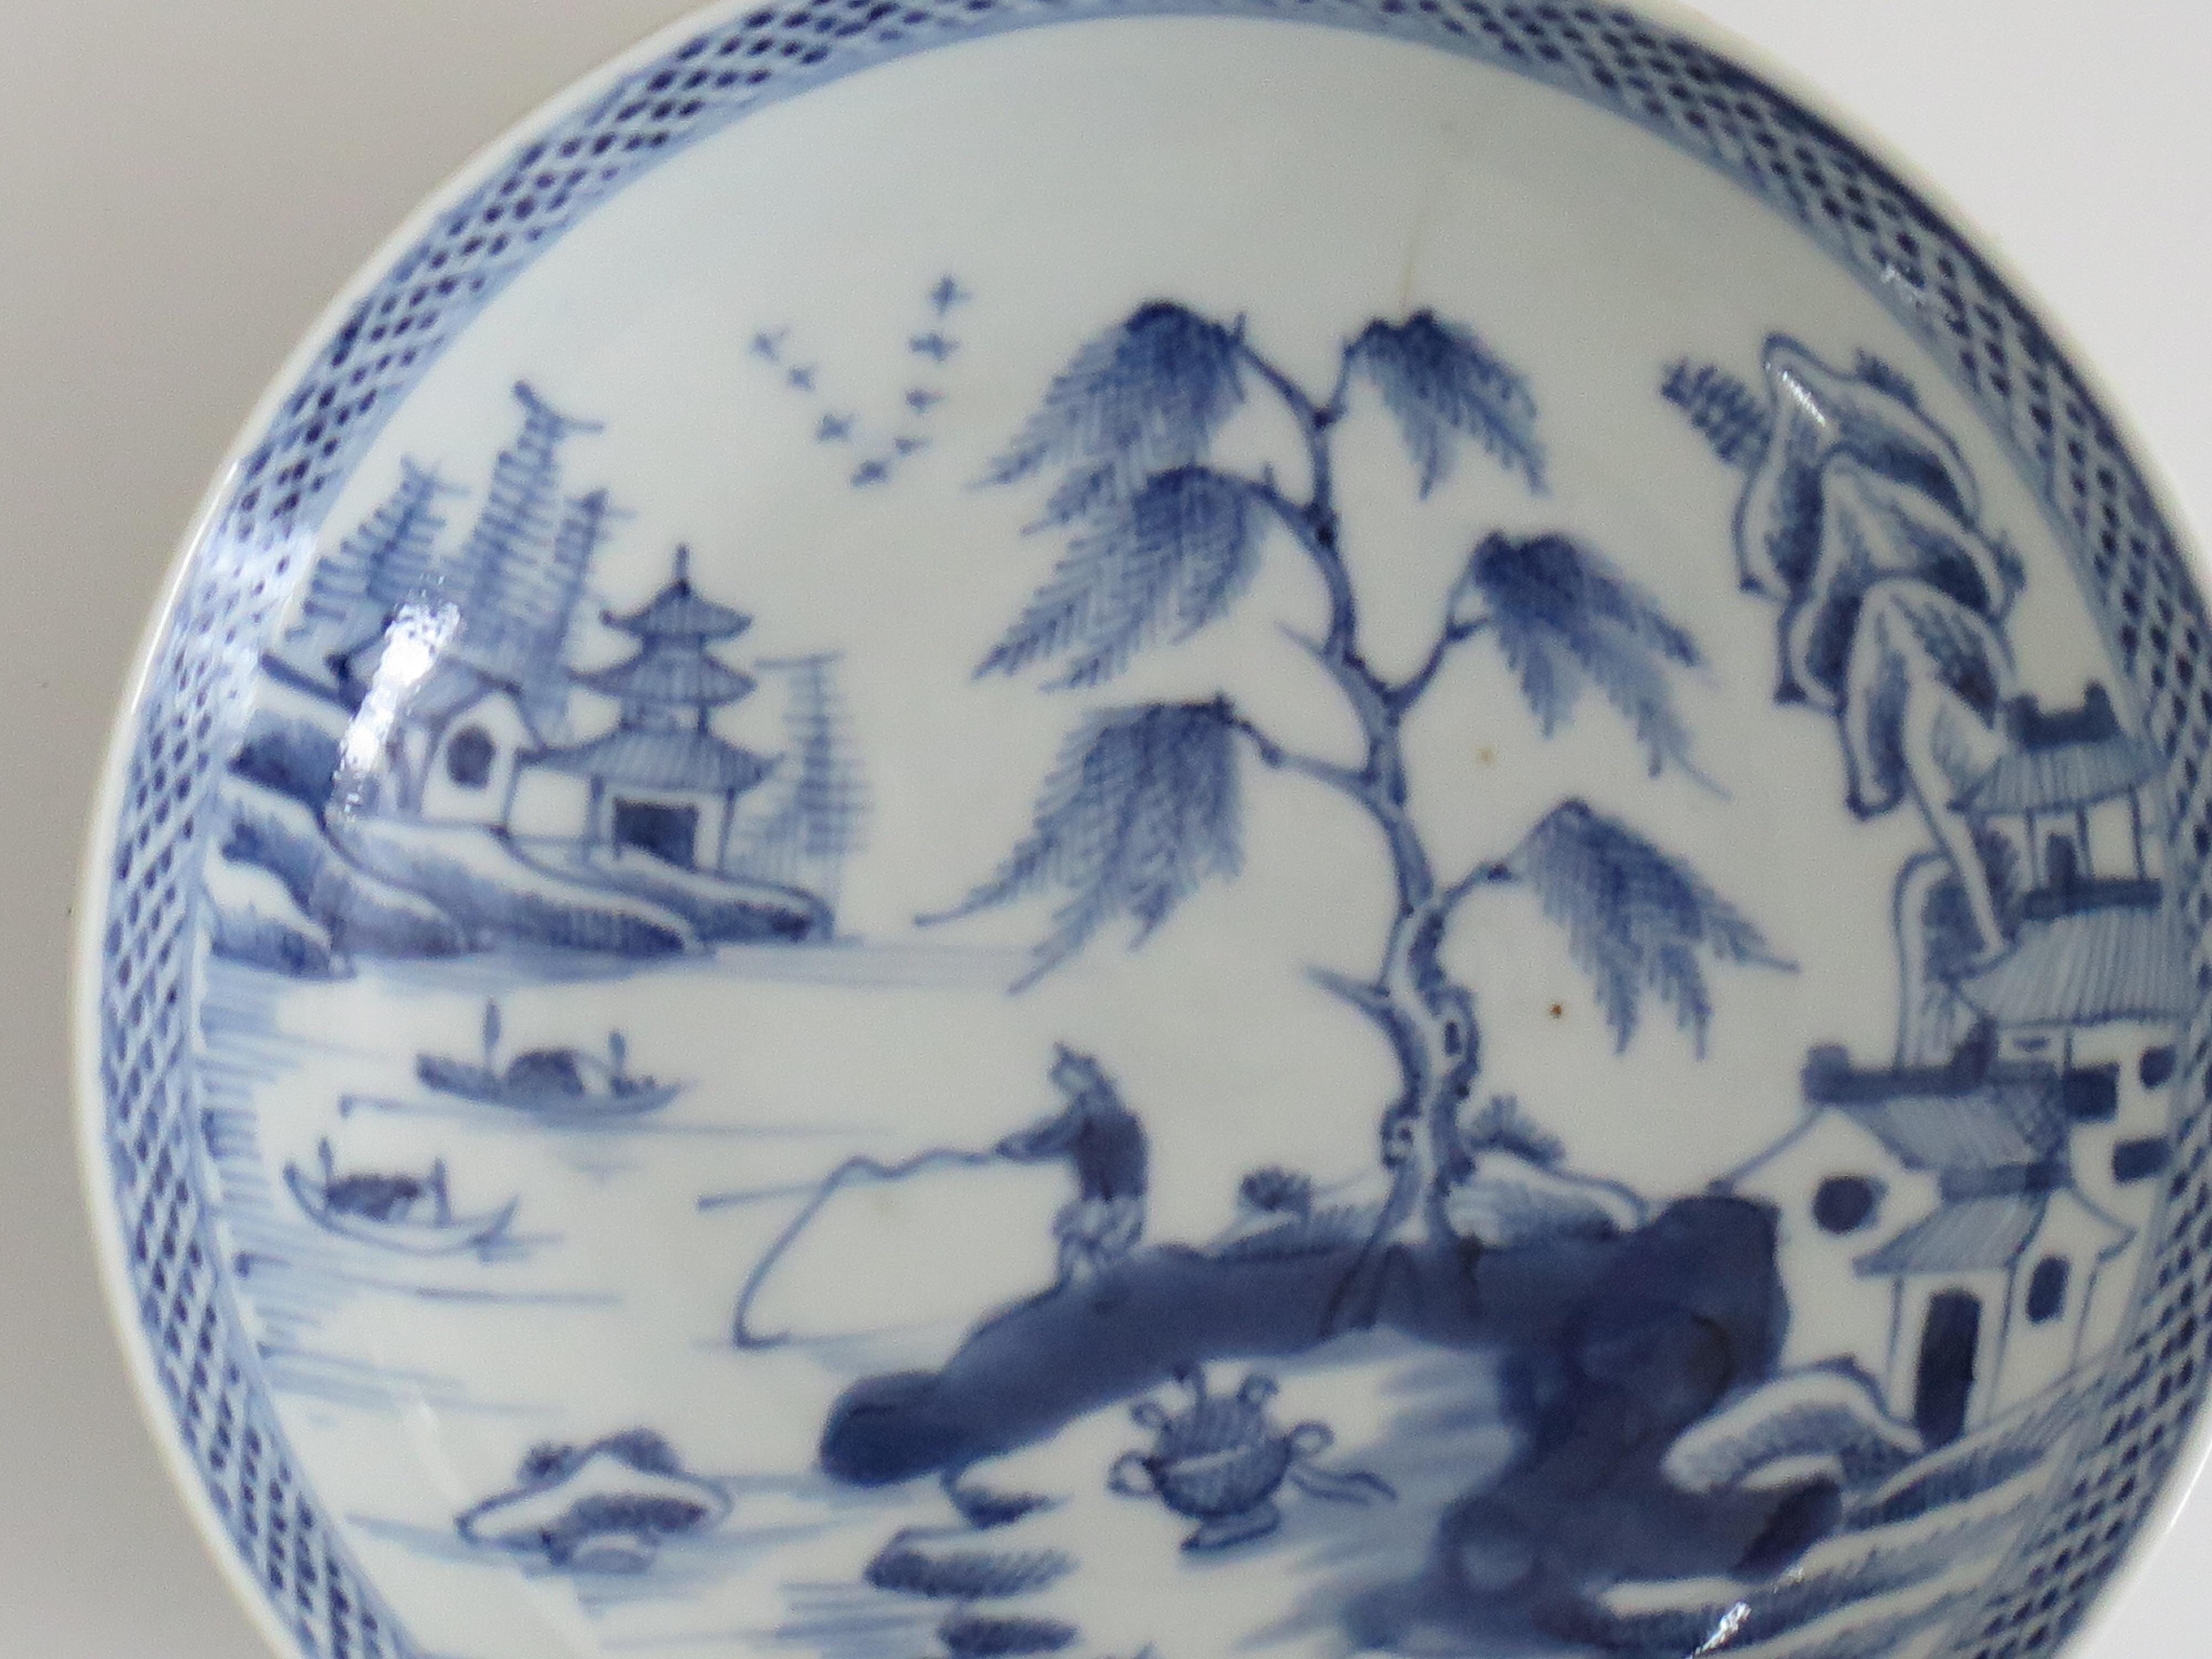 Chinese Export Porcelain Small Berry Bowl or Dish Blue & White, Late 18th C Qing 2